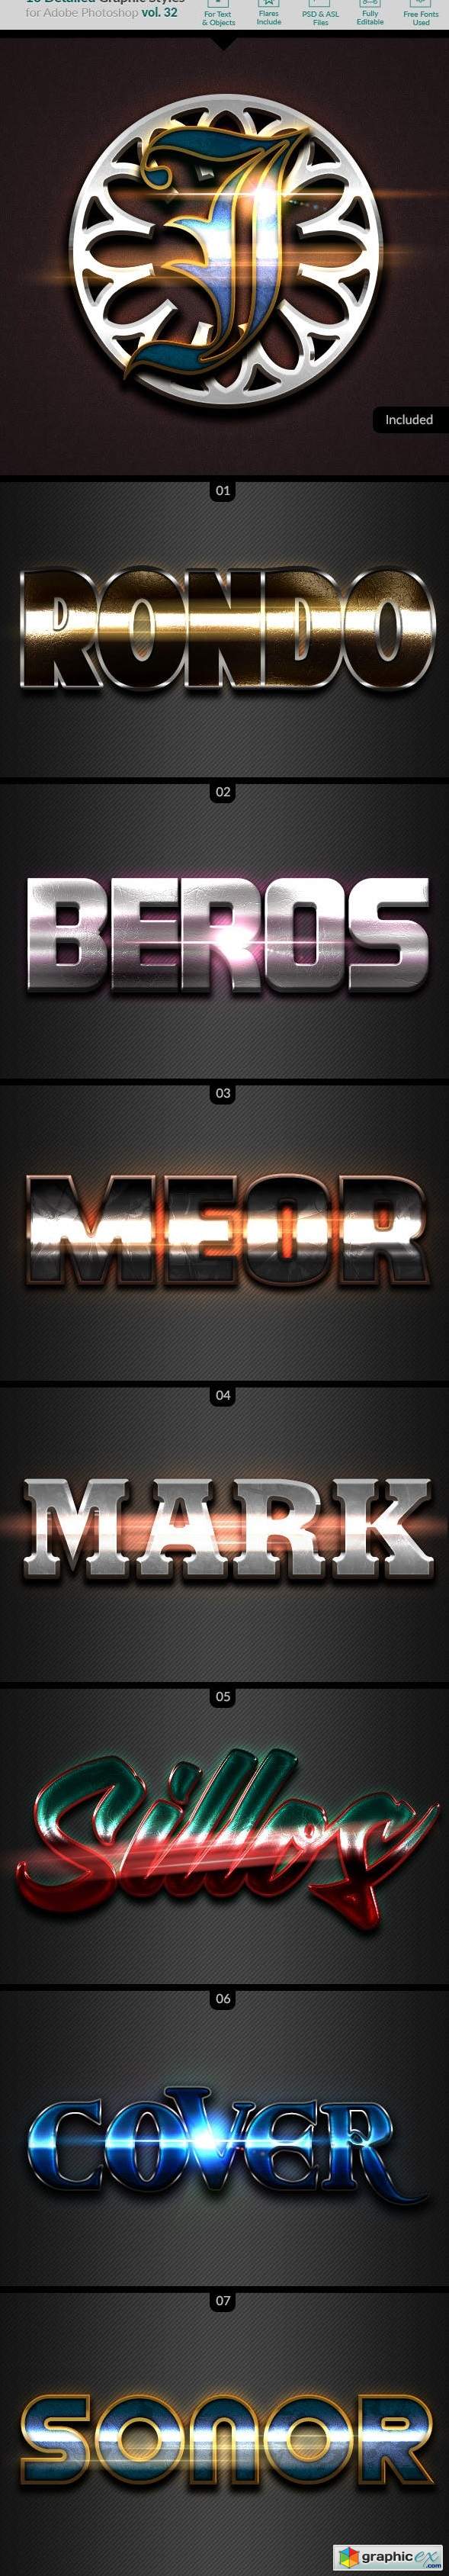 10 Text Effects Vol 32